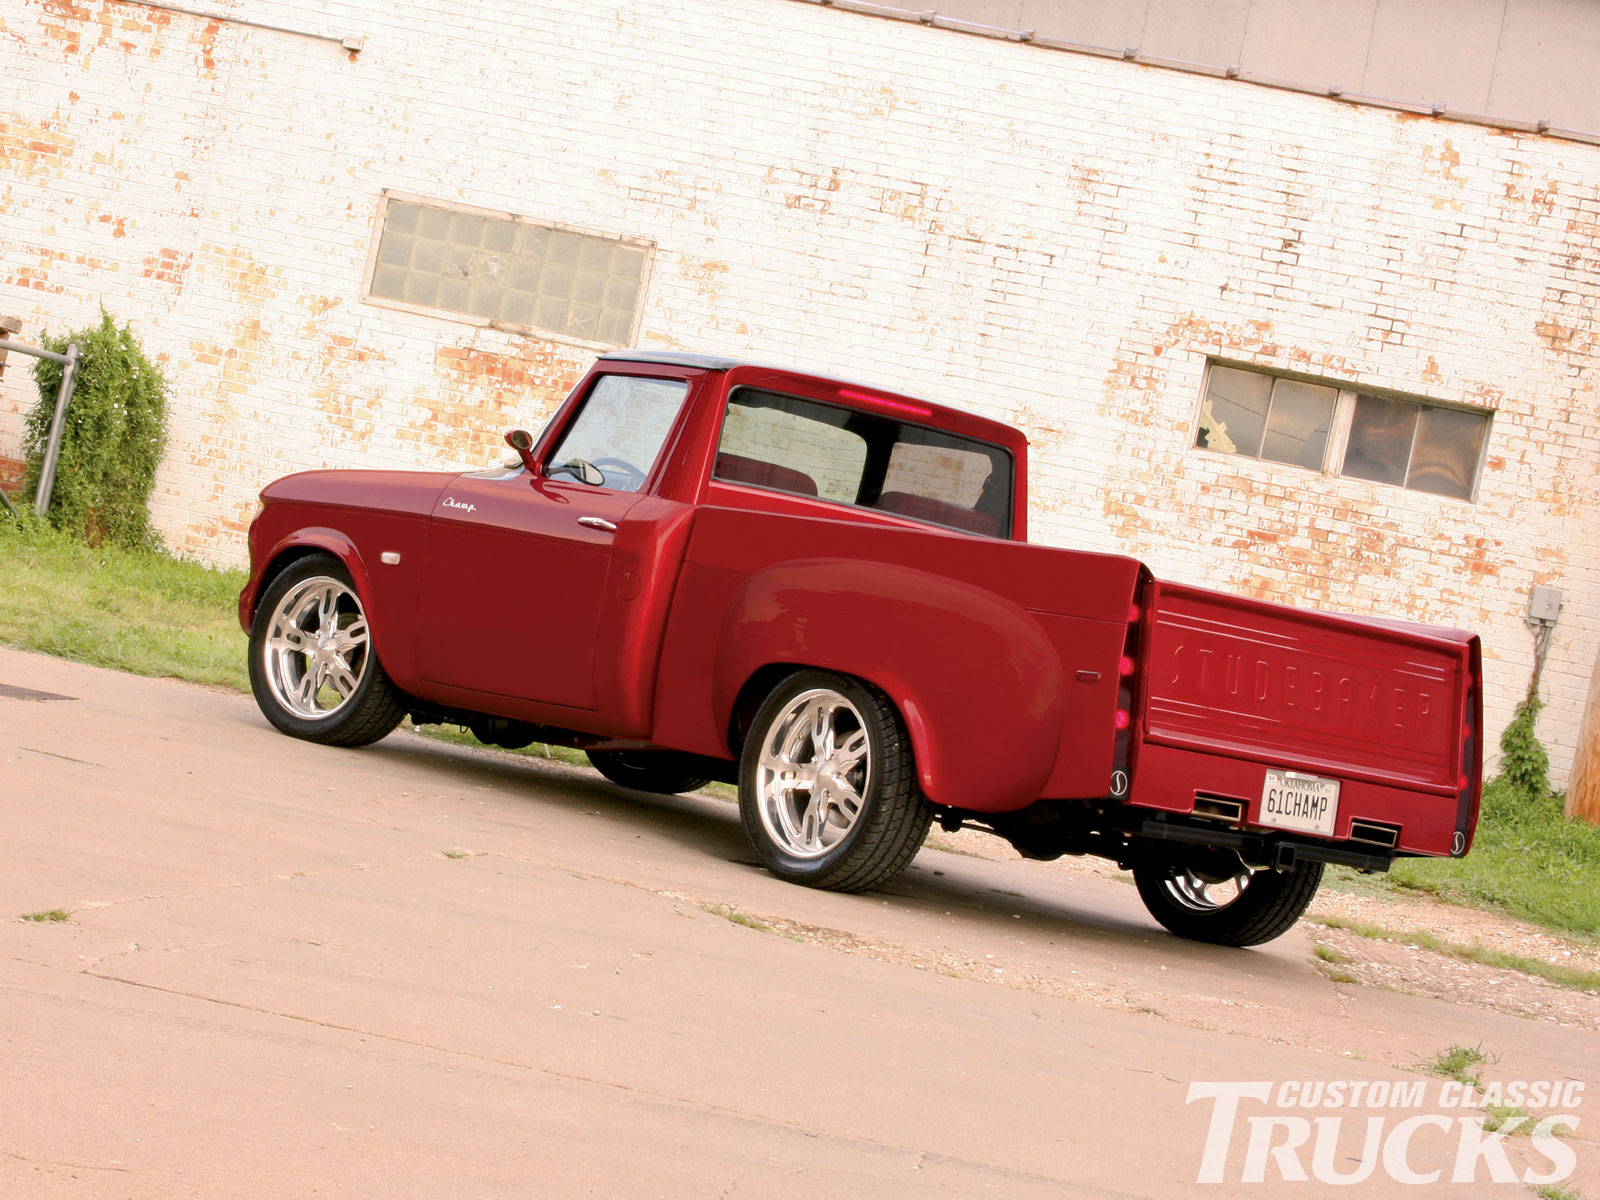 Studebaker Champ pickup Photo Gallery: Photo #11 out of 11, Image ...